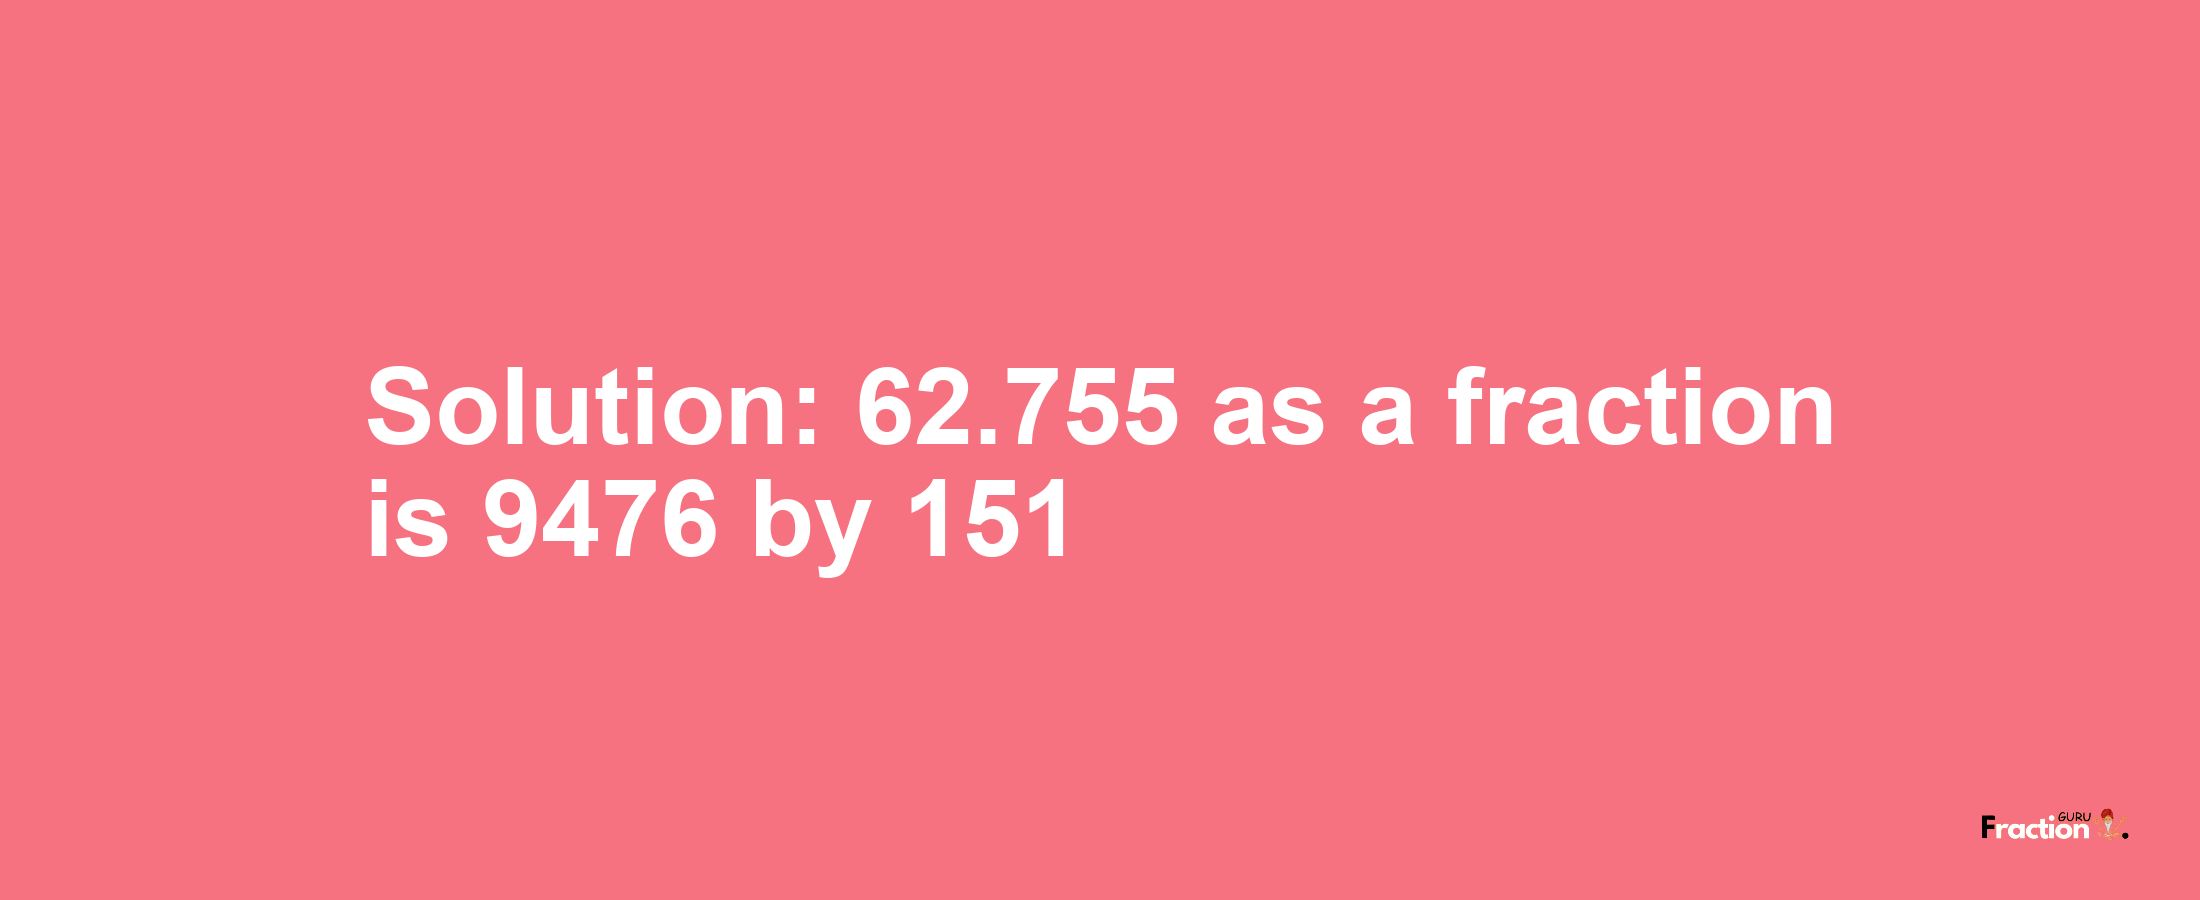 Solution:62.755 as a fraction is 9476/151